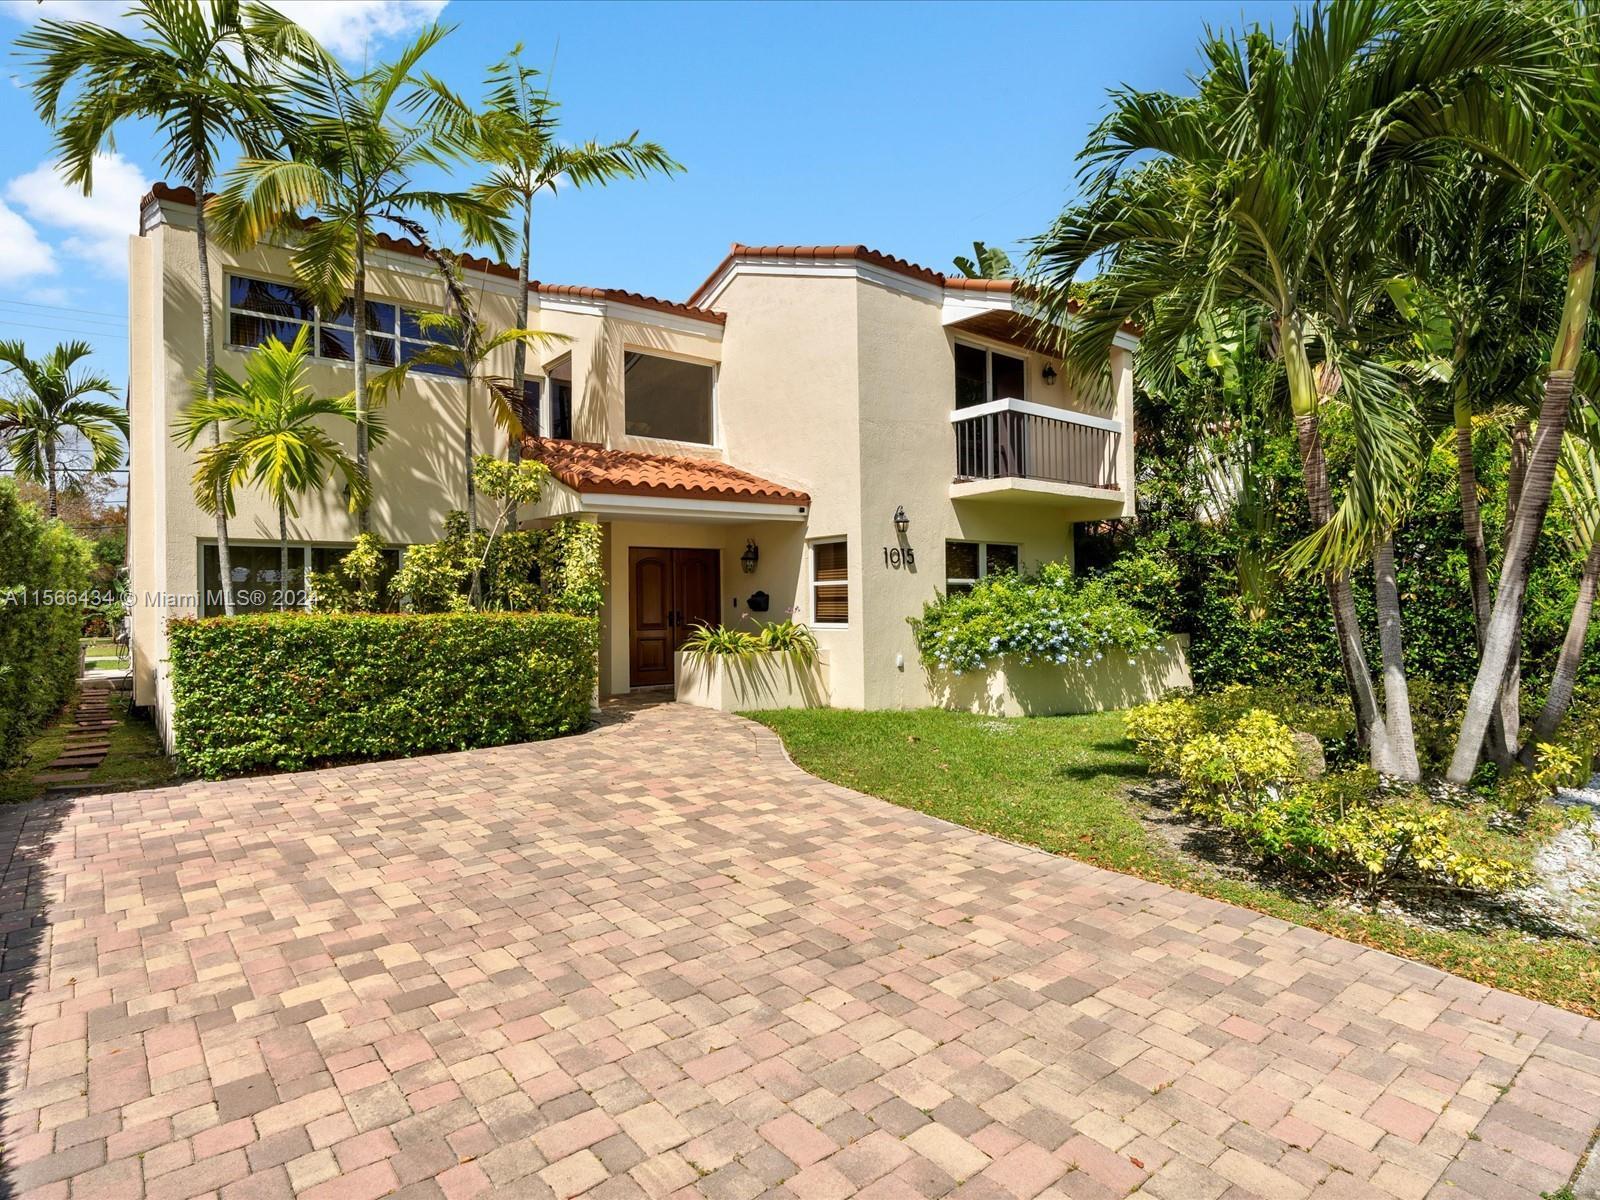 Discover this expansive 5-bedroom, 4-bathroom residence in prestigious Coral Gables. Constructed in 